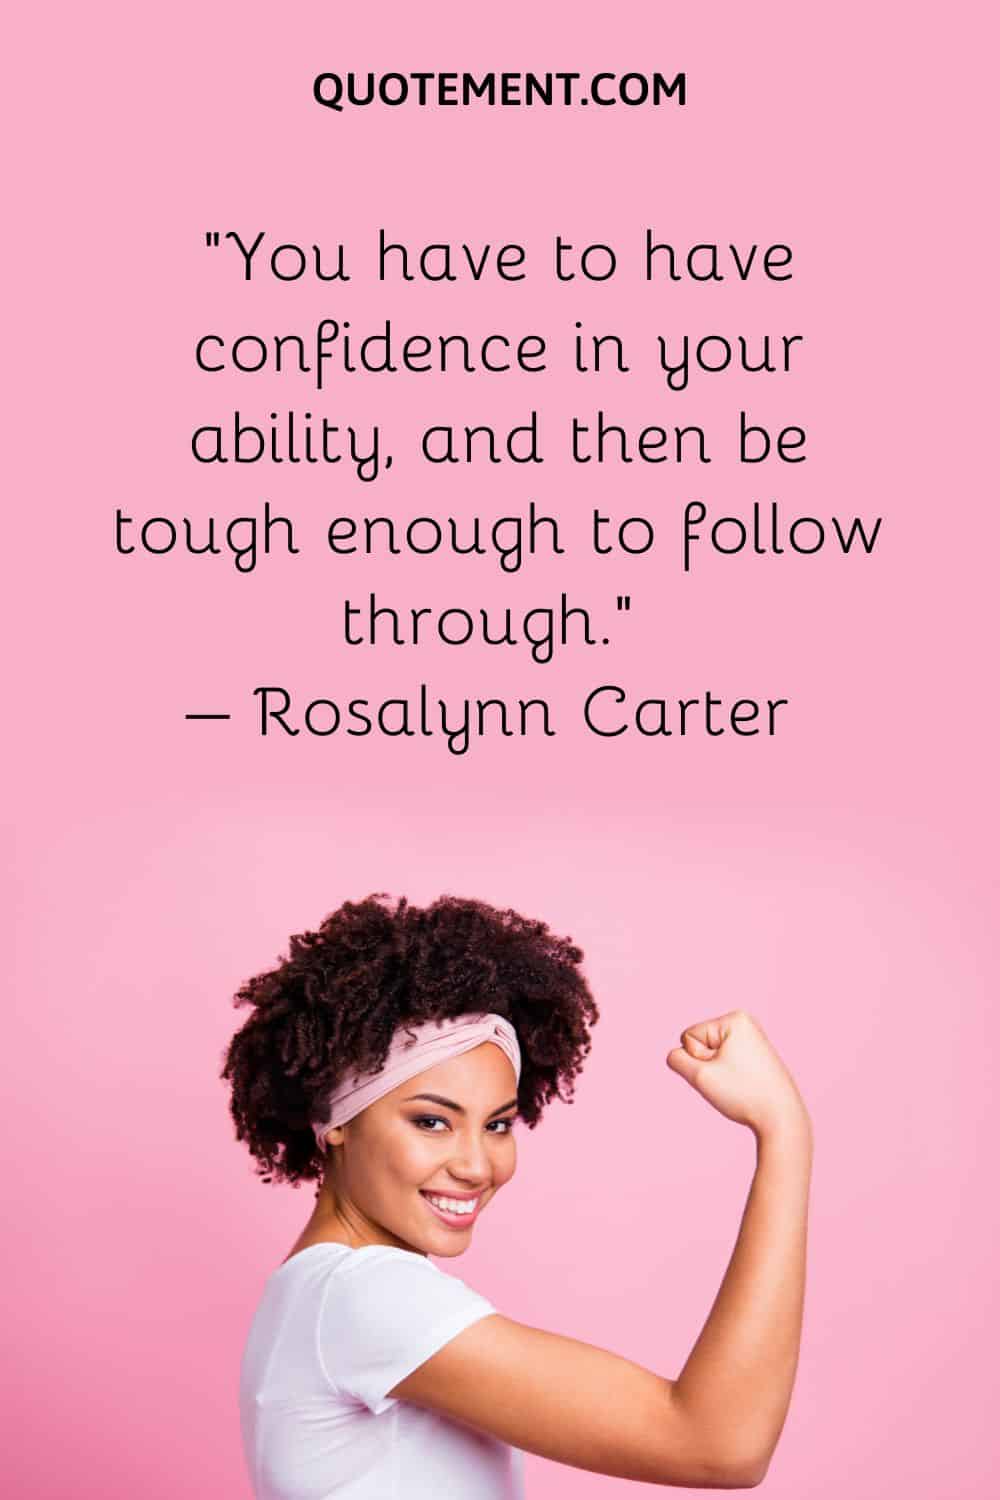 You have to have confidence in your ability, and then be tough enough to follow through